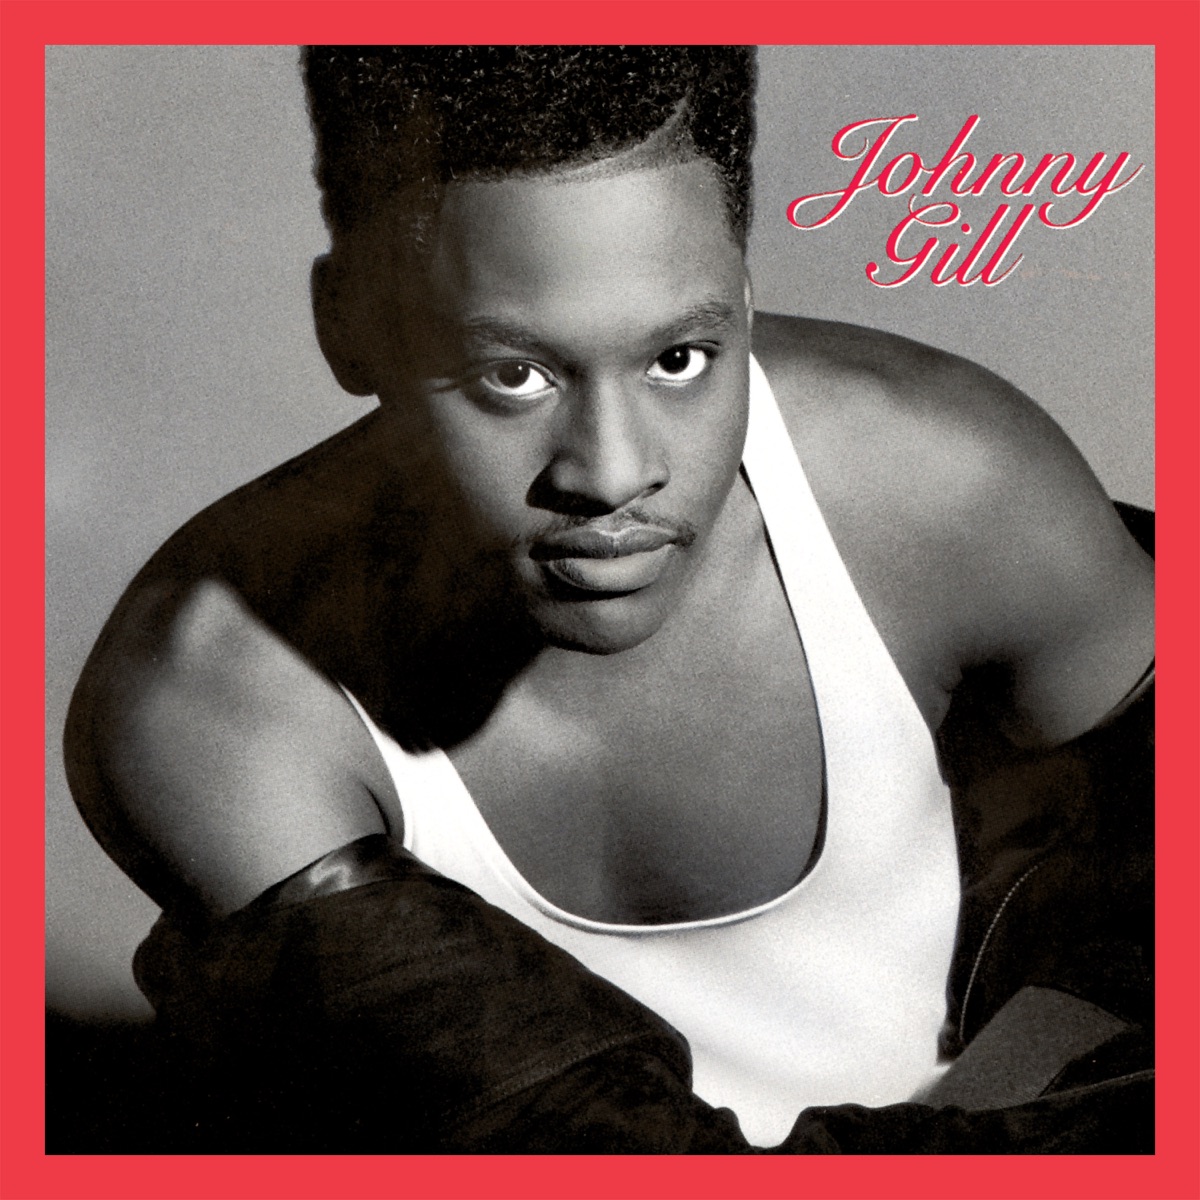 ‎Johnny Gill - Album by Johnny Gill - Apple Music